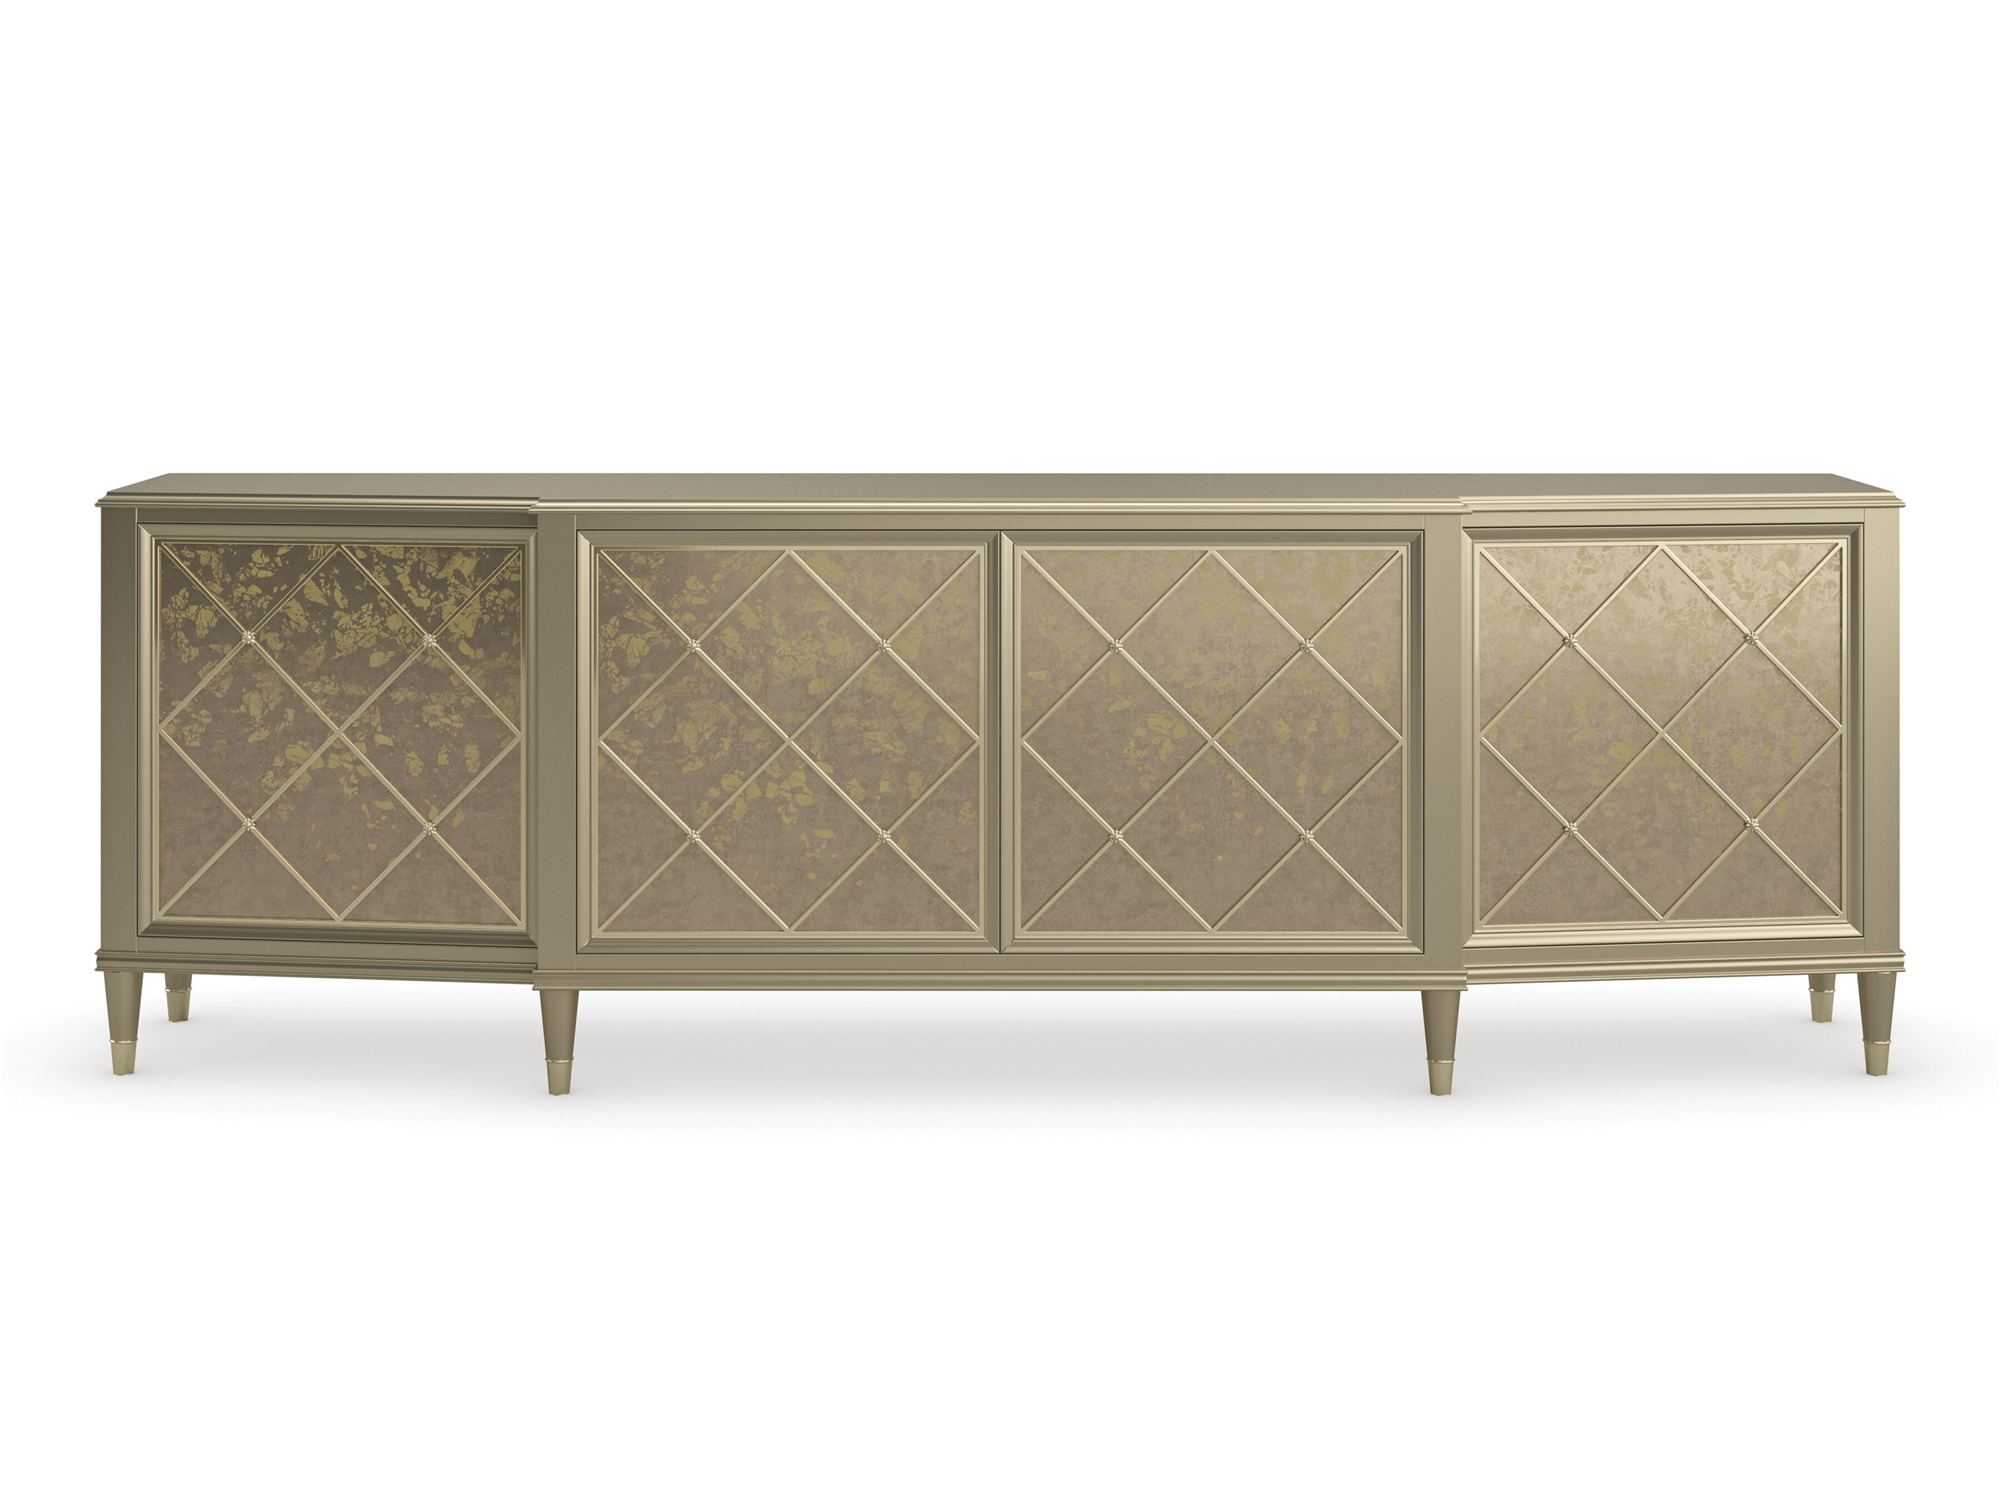 Babs Star of the Show Cabinet - Euro Living Furniture